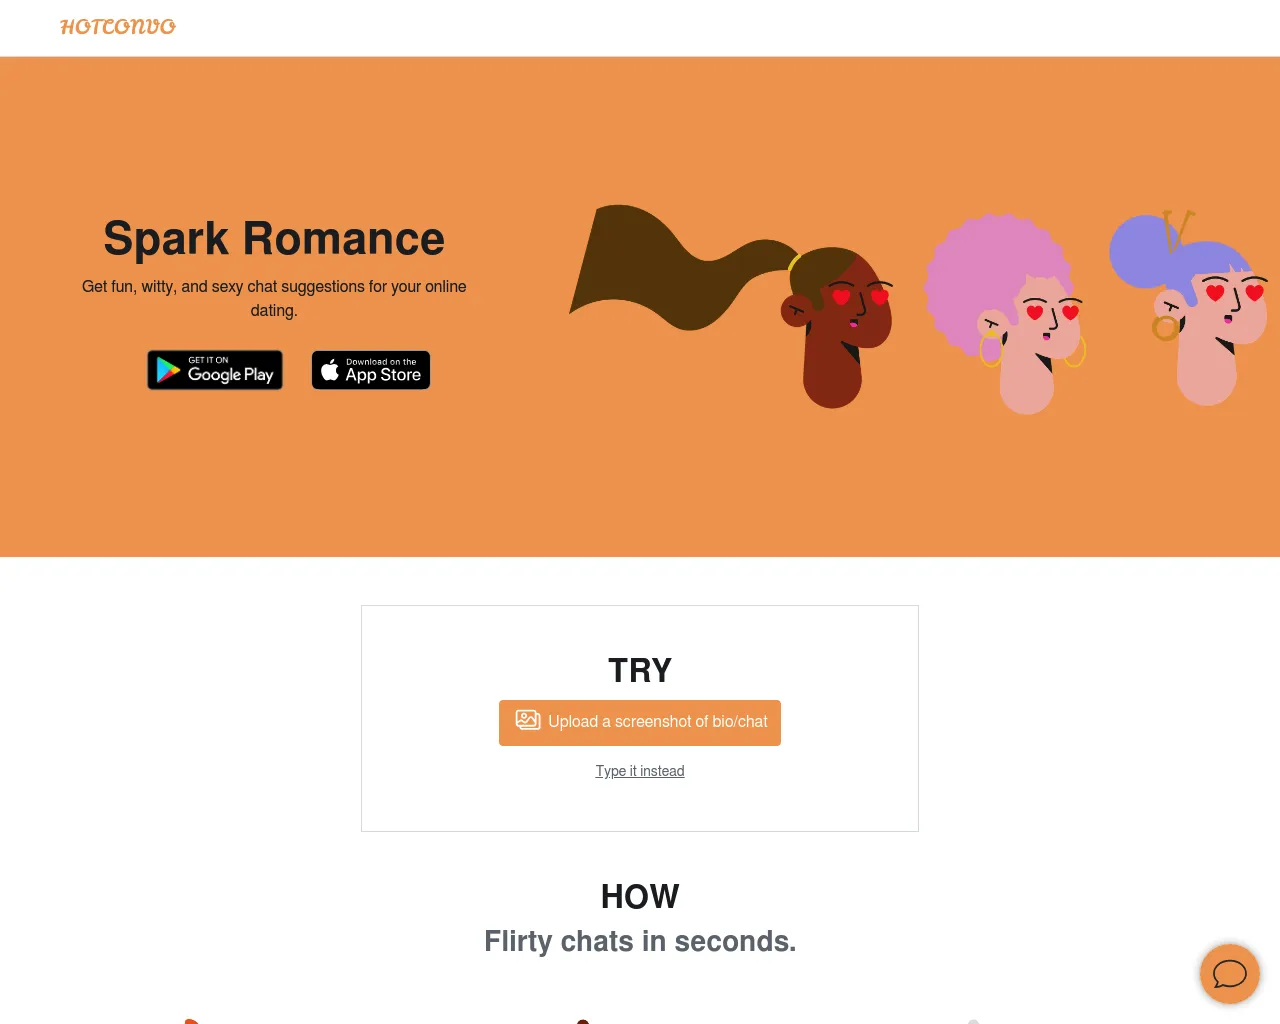 Spark Romance - Get Fun, Witty, and Sexy Chat Suggestions for Your Online Dating